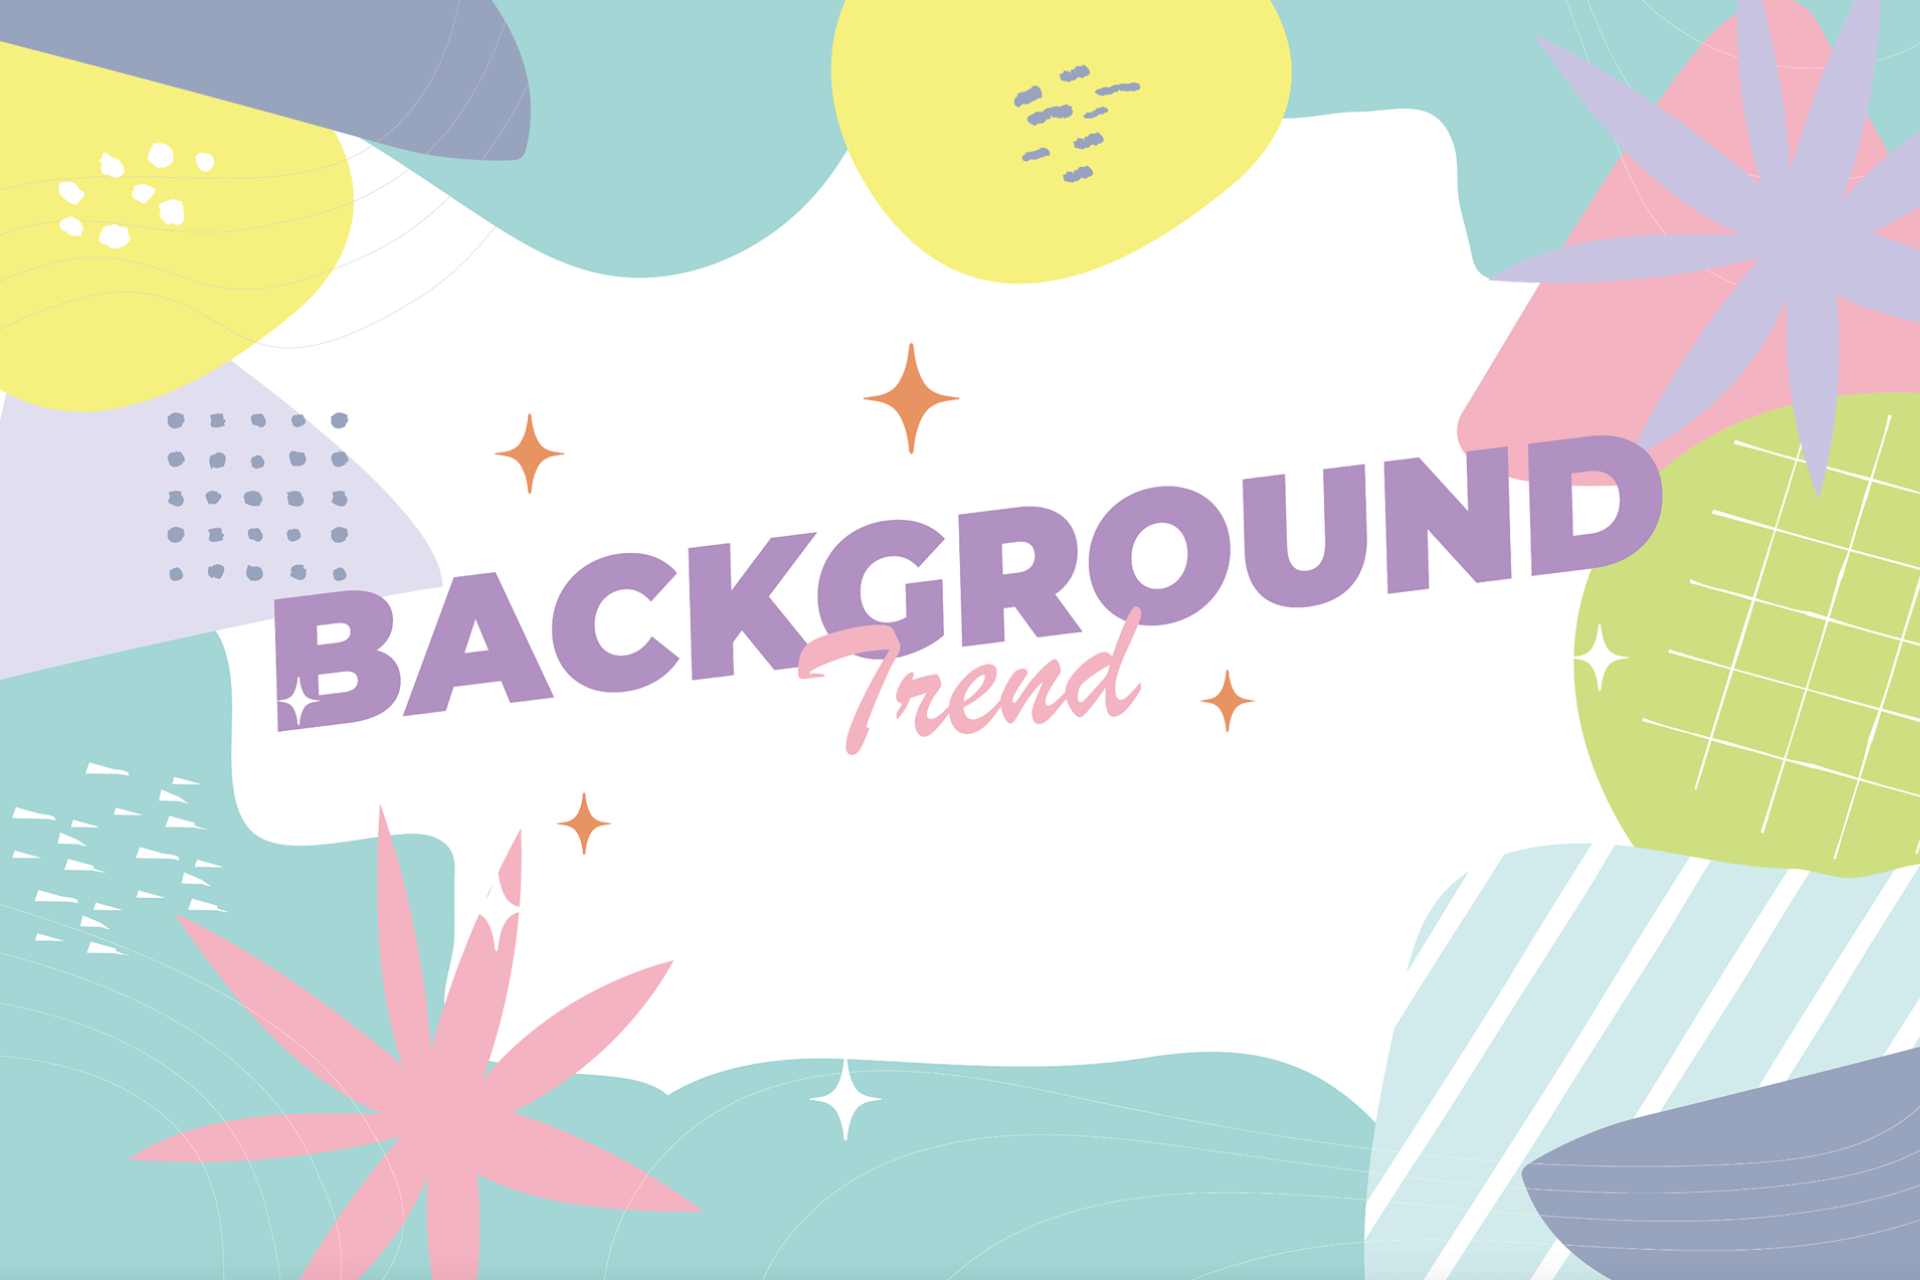 15+ Background Design Trends & Styles For 2022